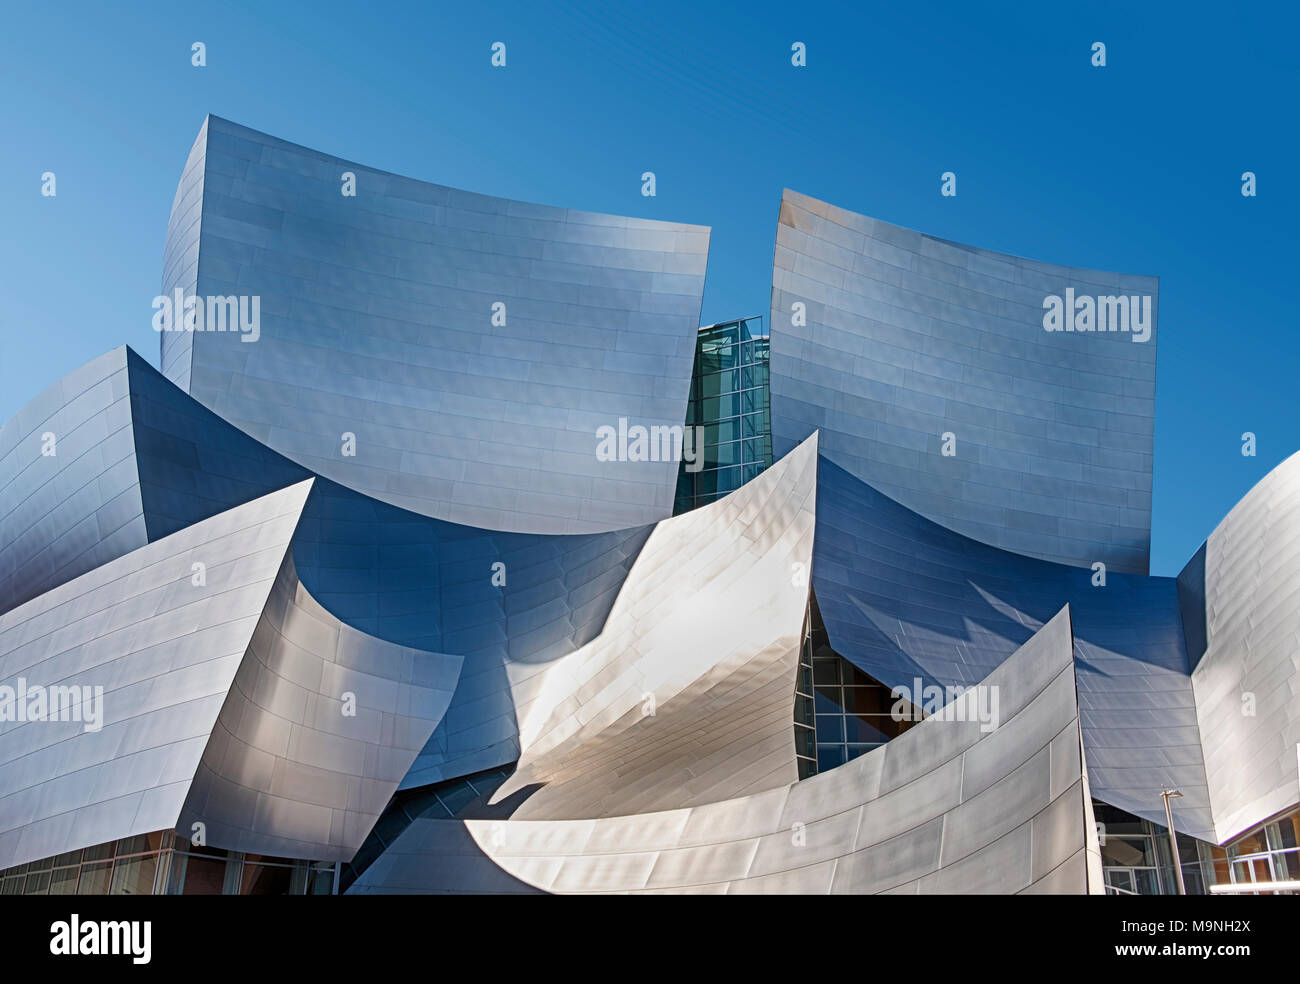 LOS ANGELES, USA - SEPTEMBER 25, 2017: The majestic front facade of the Walt Disney Philharmonic Hall in Los Angeles highlights the architecture. Stock Photo